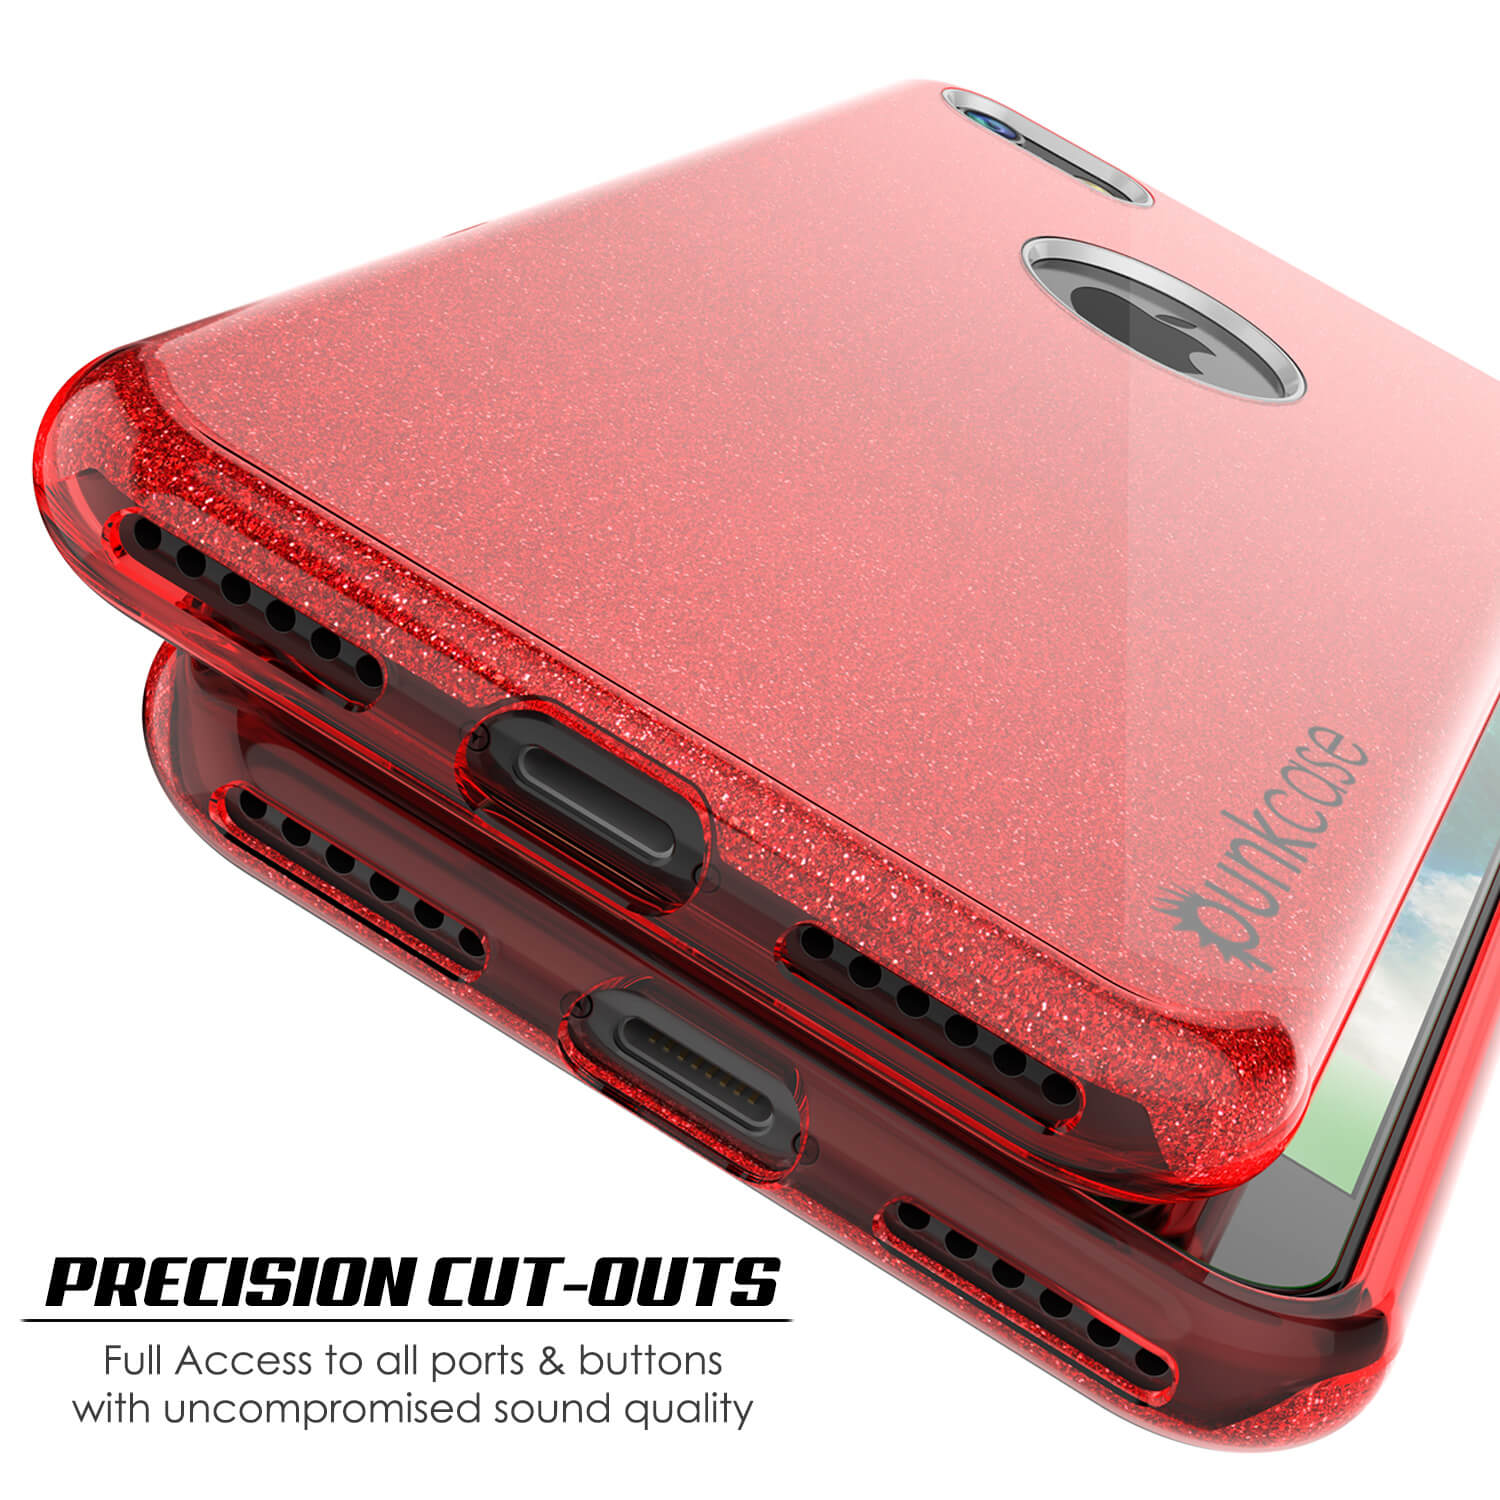 iPhone 6s/6 Case PunkCase Galactic Red Slim w/ Tempered Glass | Lifetime Warranty